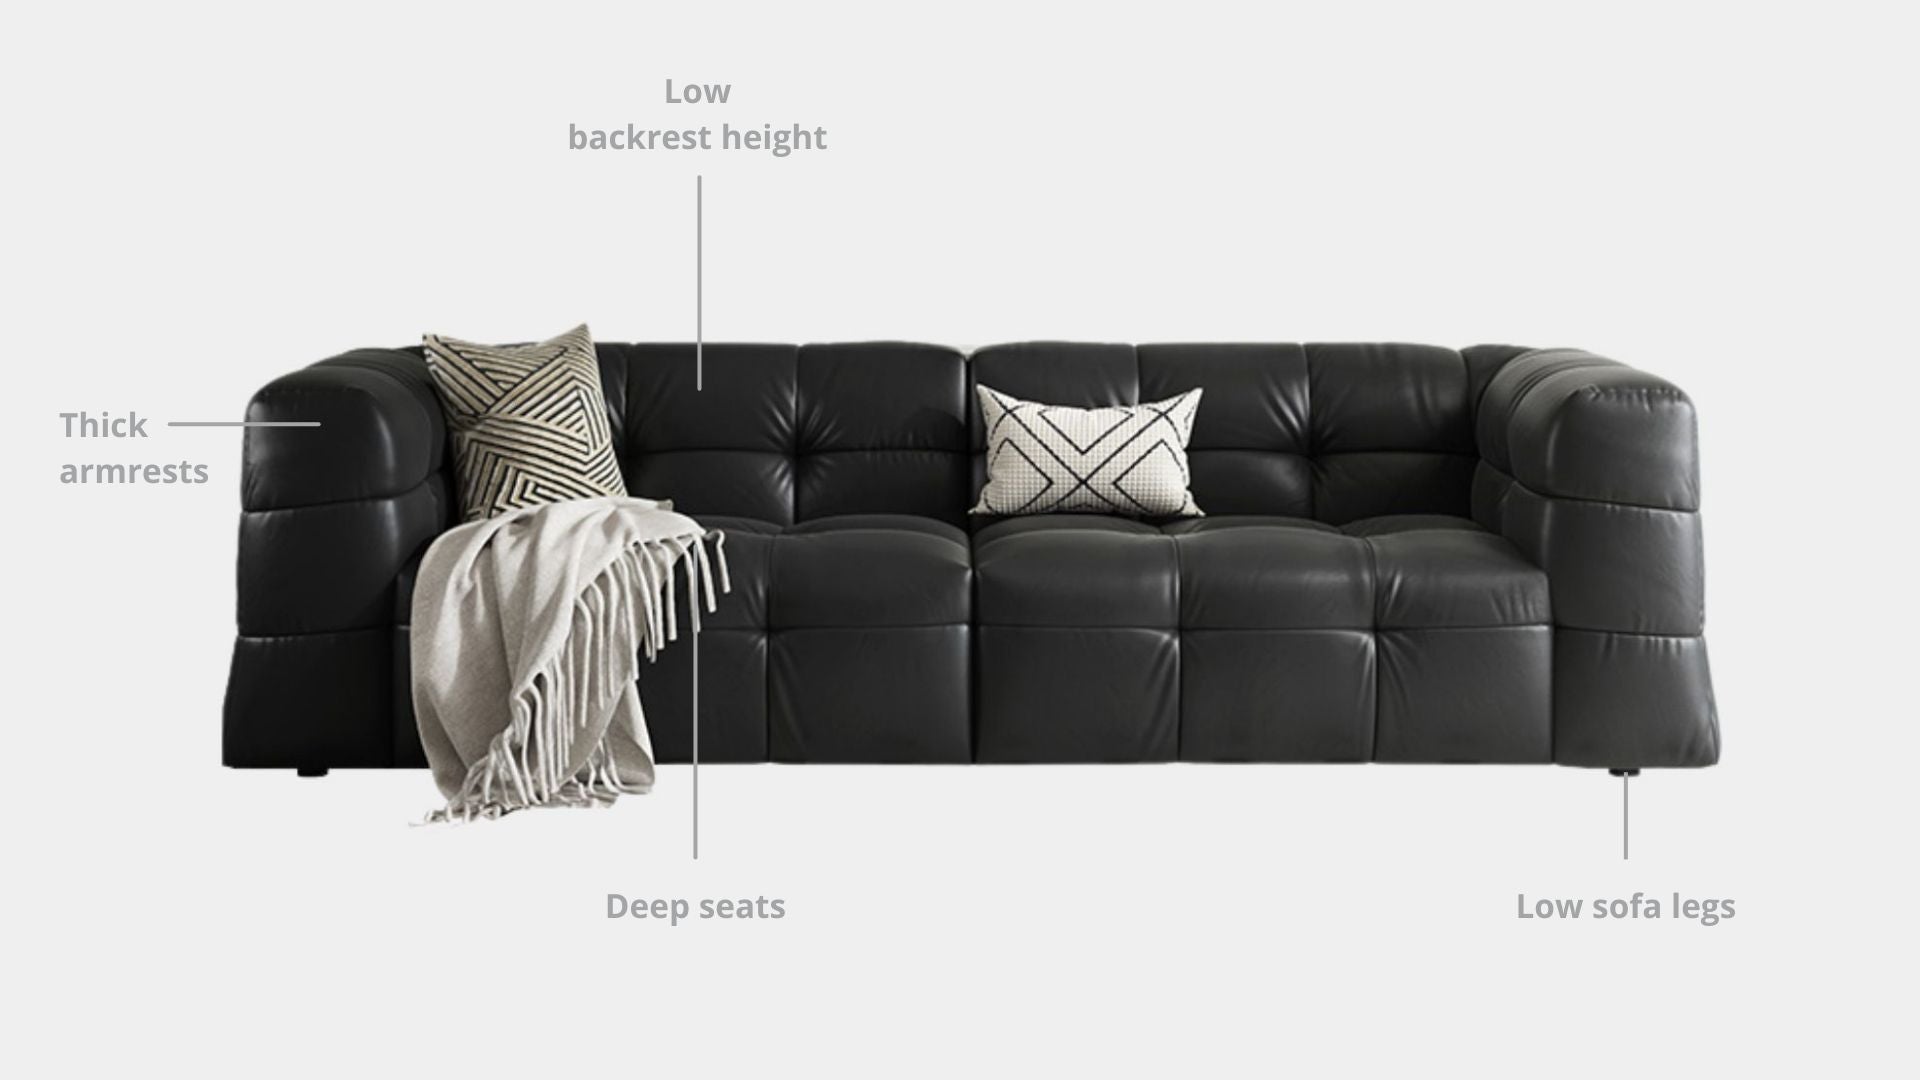 Key features such as armrest thickness, cushion height, seat depth and sofa leg height for Cutey Half Leather Sofa